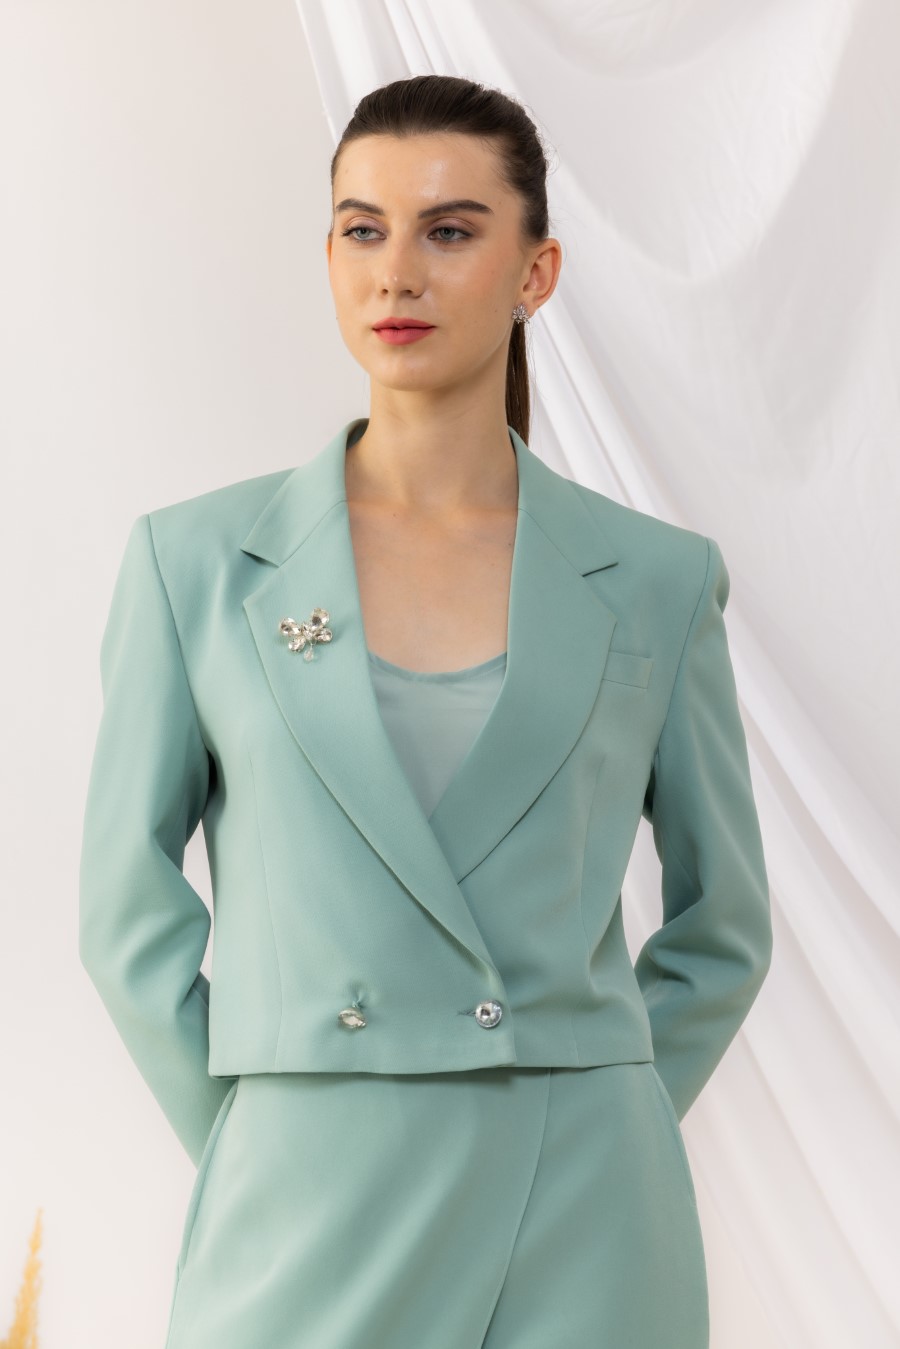 Sea Green Double Breasted Blazer With Crystal Buttons And Brooch